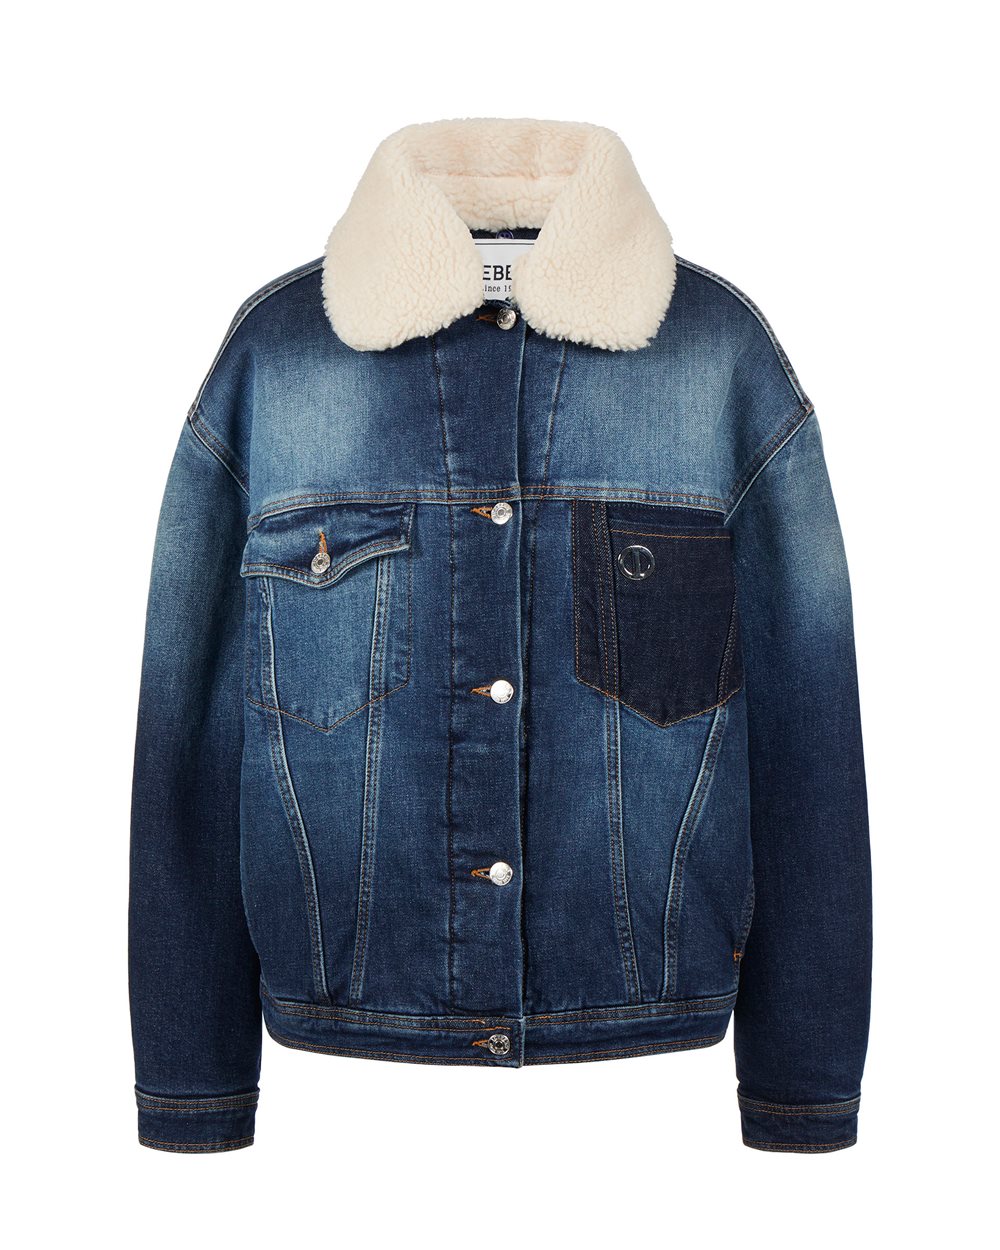 Denim jacket with eco-fur collar - carosello HP woman shoes | Iceberg - Official Website